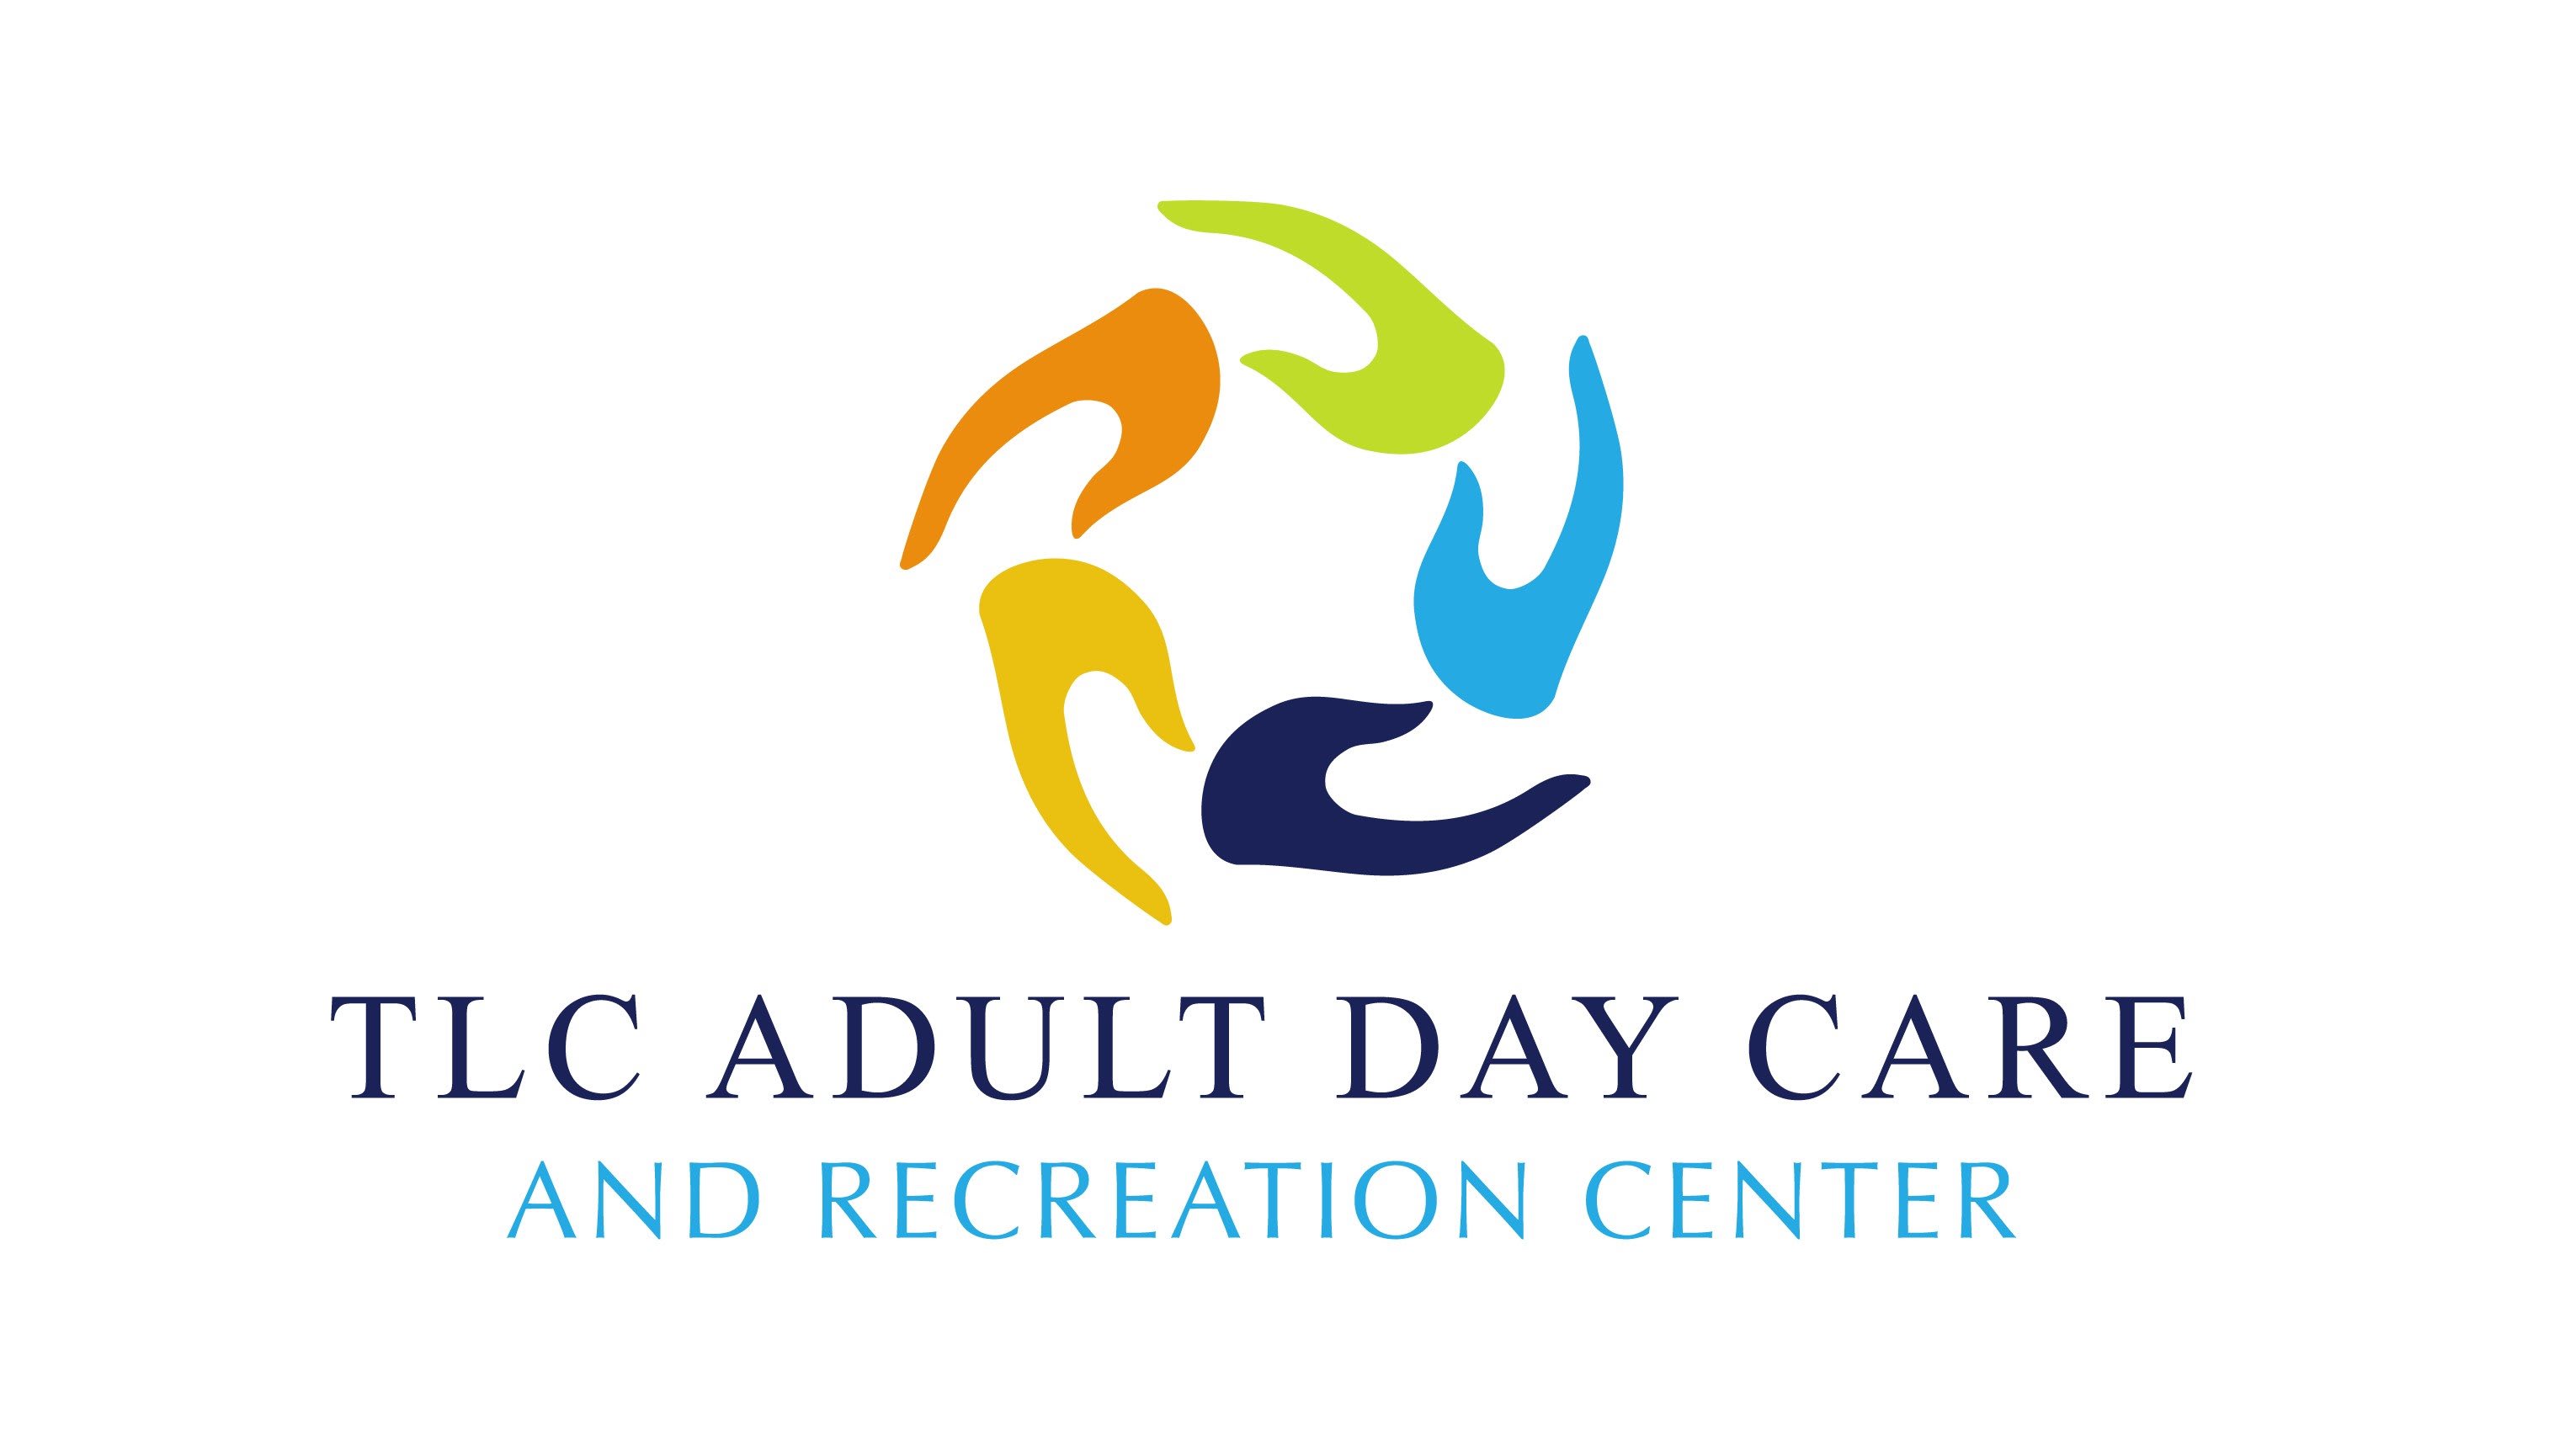 TLC Adult Day Care and Recreation Center